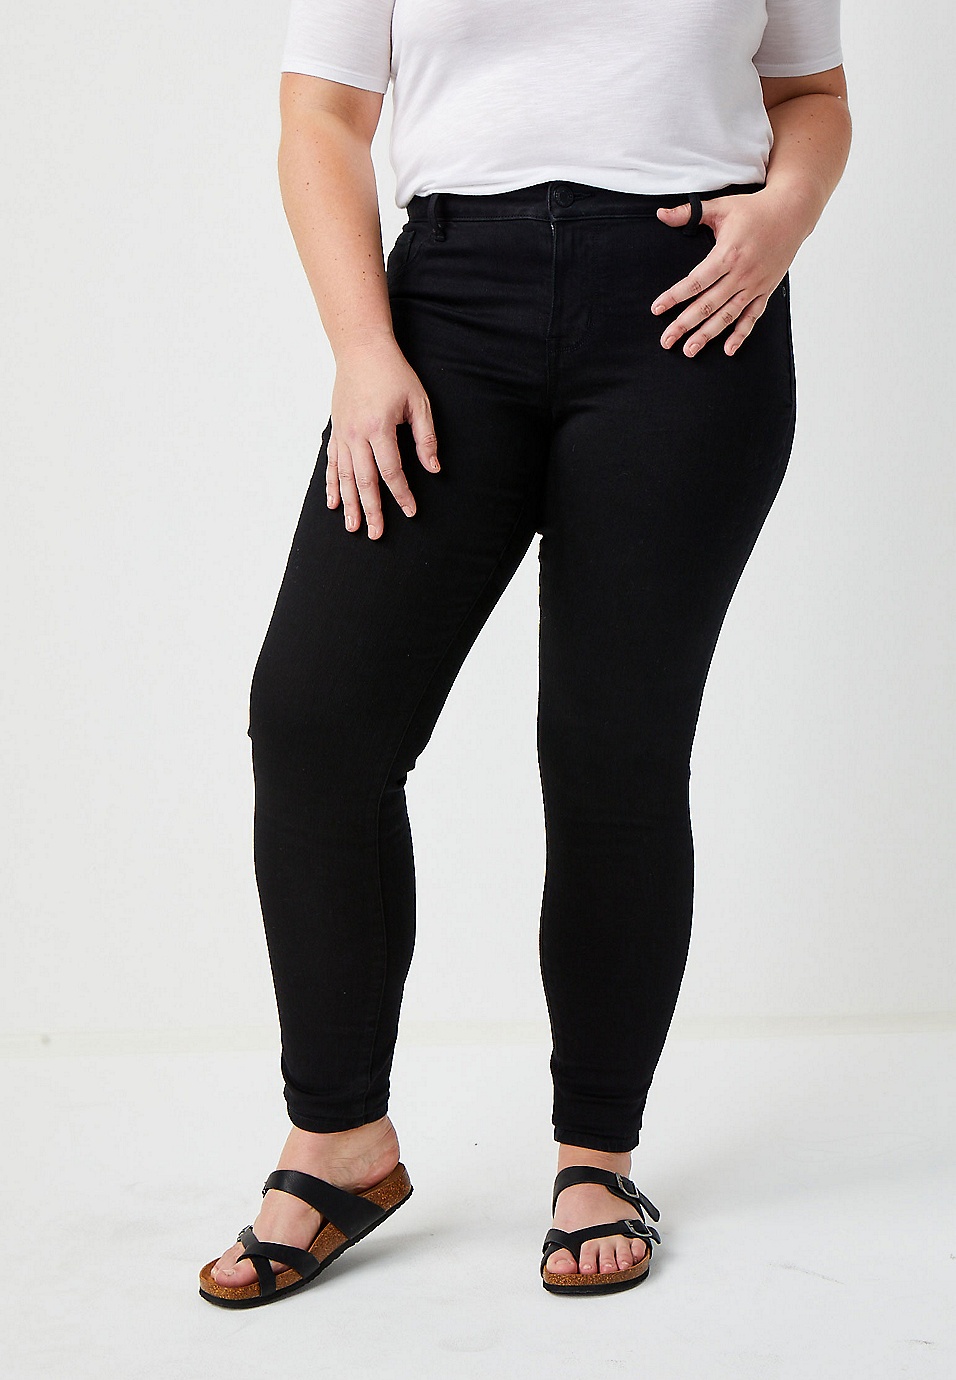 Plus Size m jeans by maurices™ Black Mid Rise Jegging